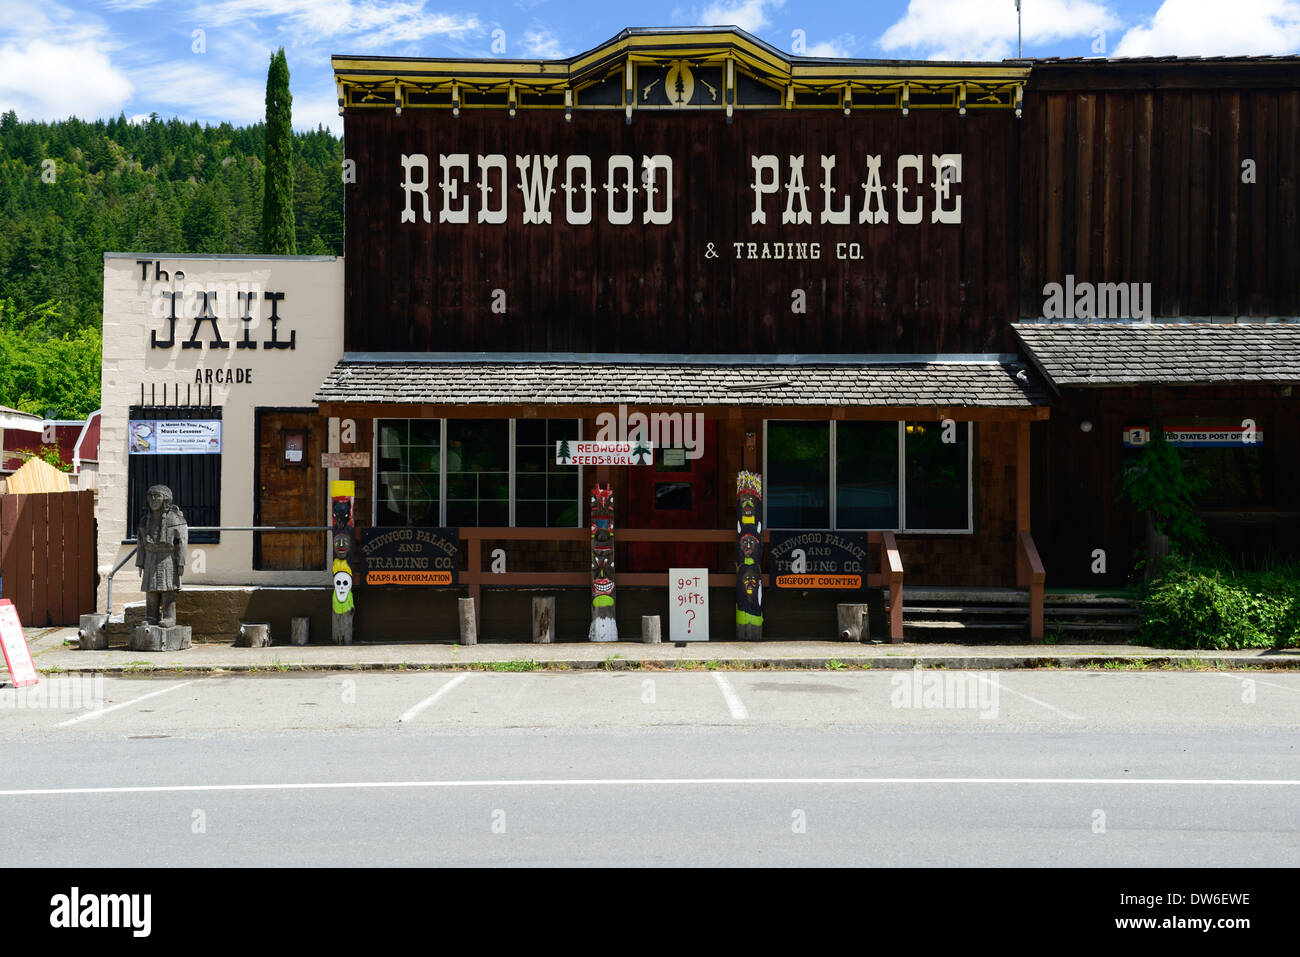 Bois rouge palace trading company miranda California redwoods forest state park attraction touristique store shop shopping Banque D'Images